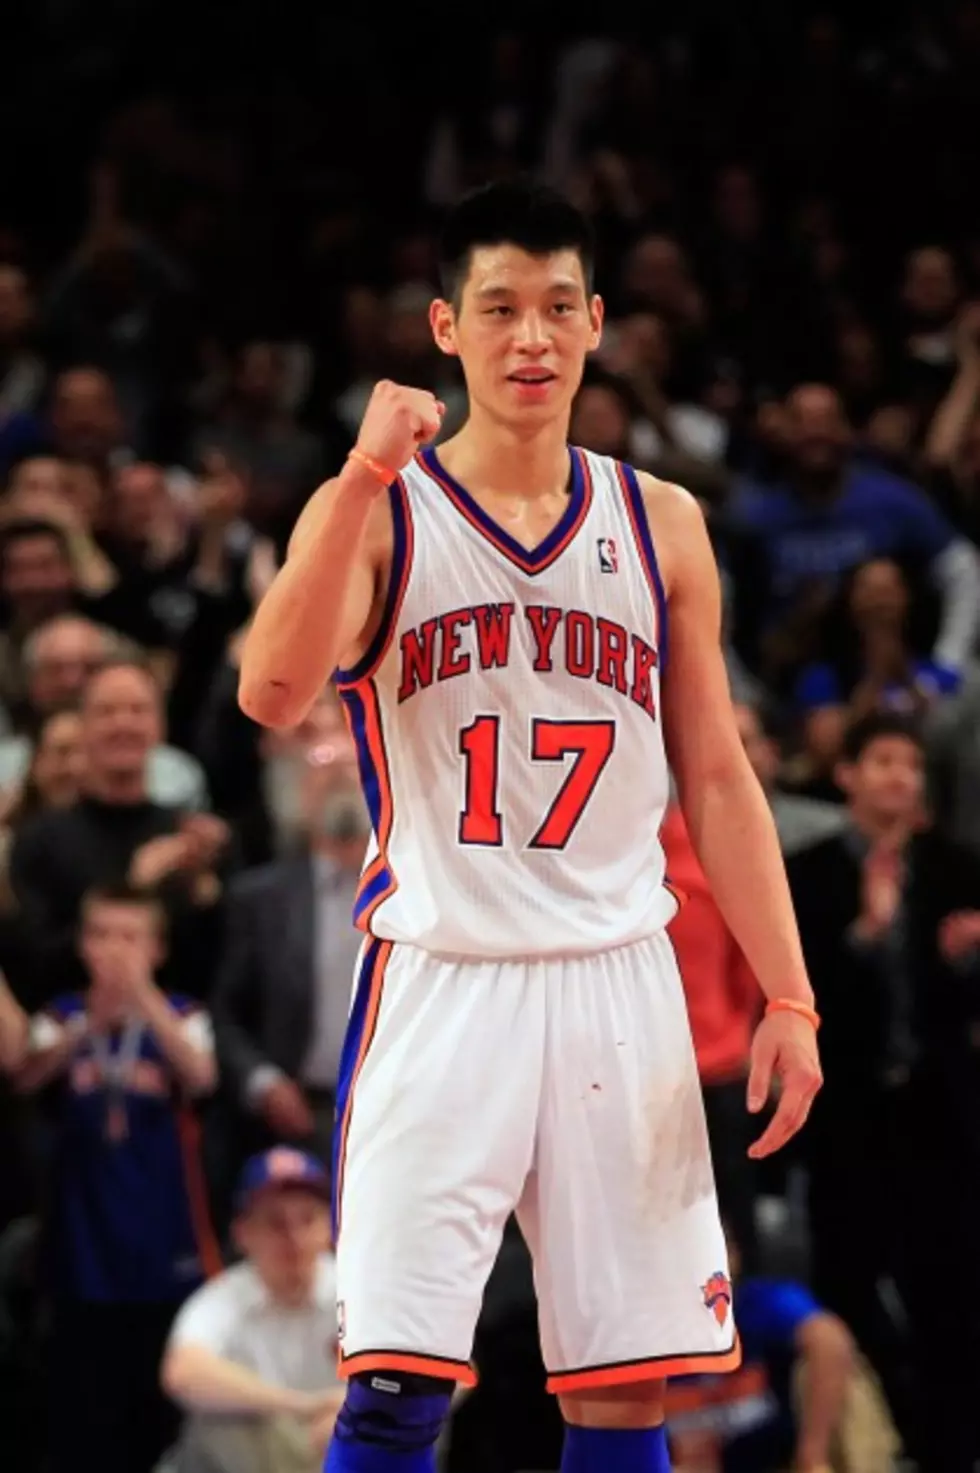 Jeremy Lin makes the TIME magazine cover after 5 games